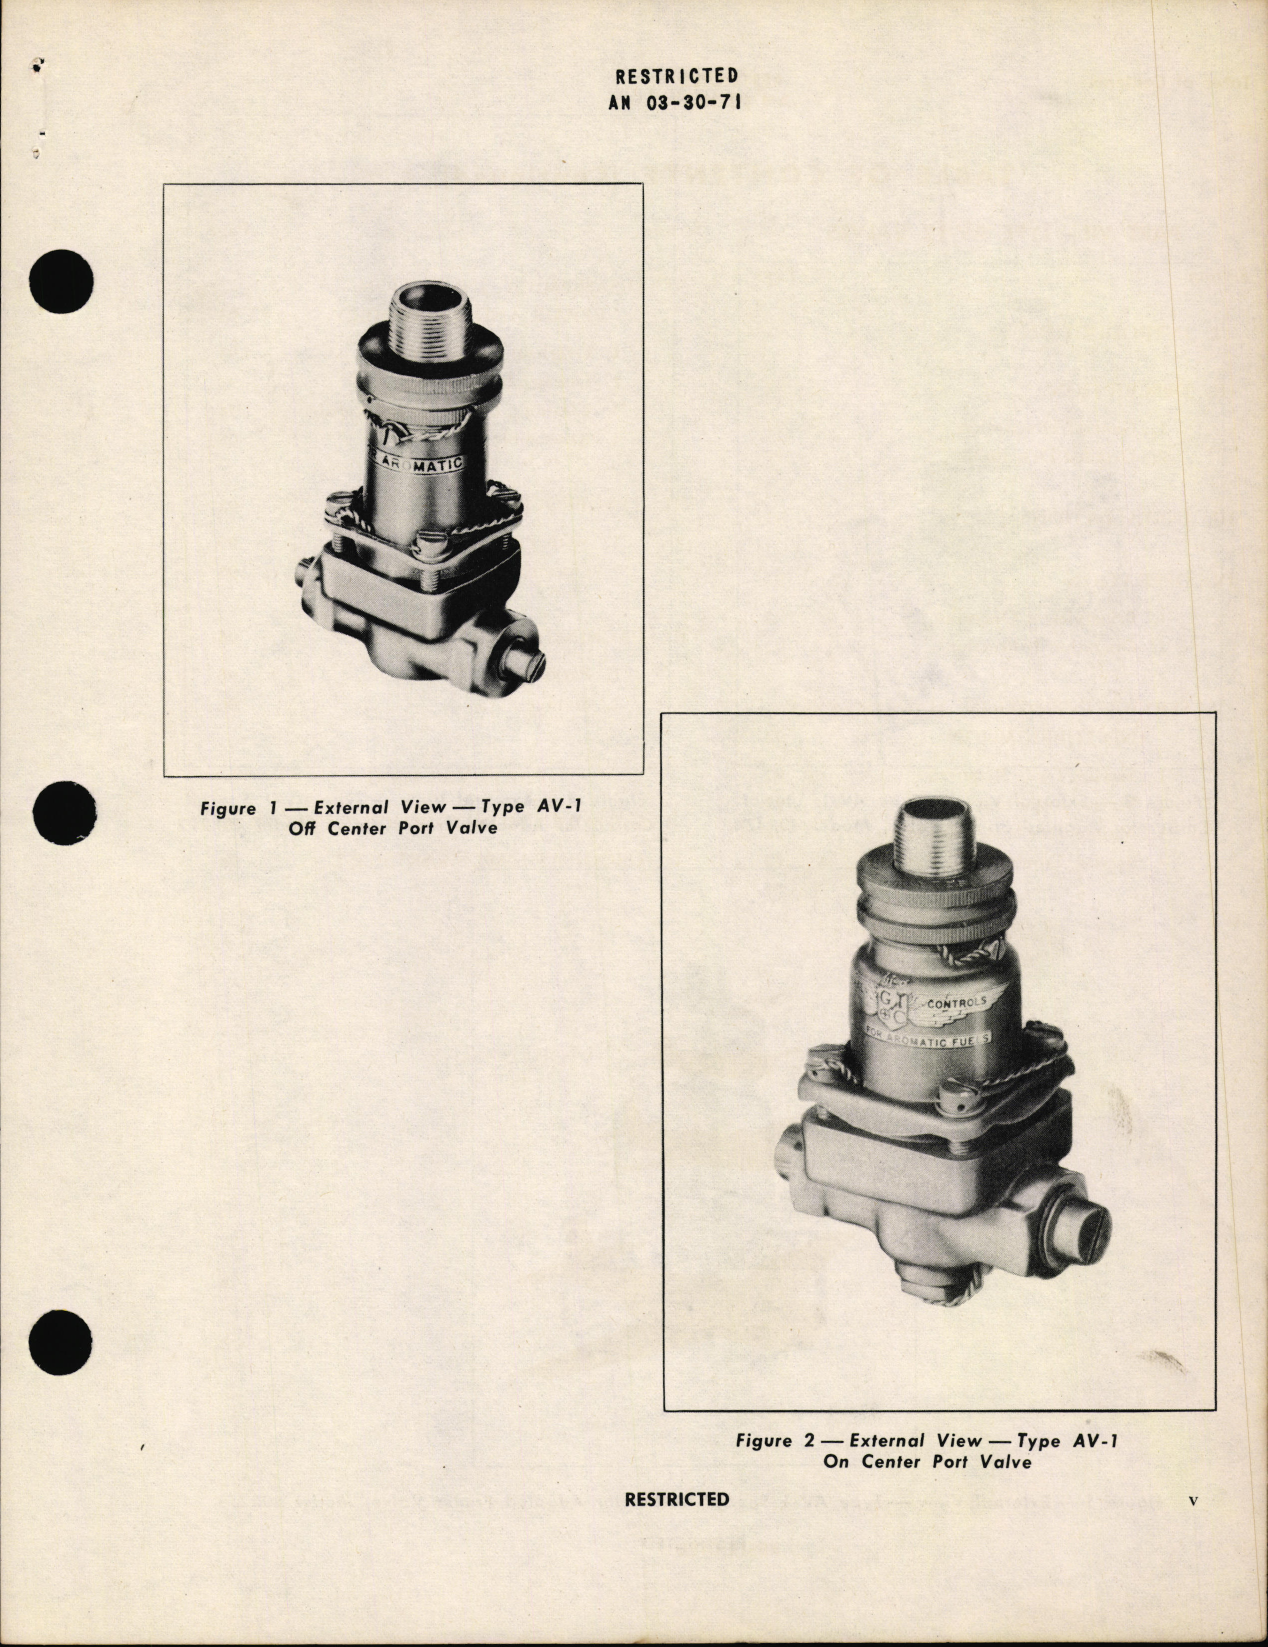 Sample page 7 from AirCorps Library document: Handbook of Instructions with Parts Catalog for Aircraft Valves